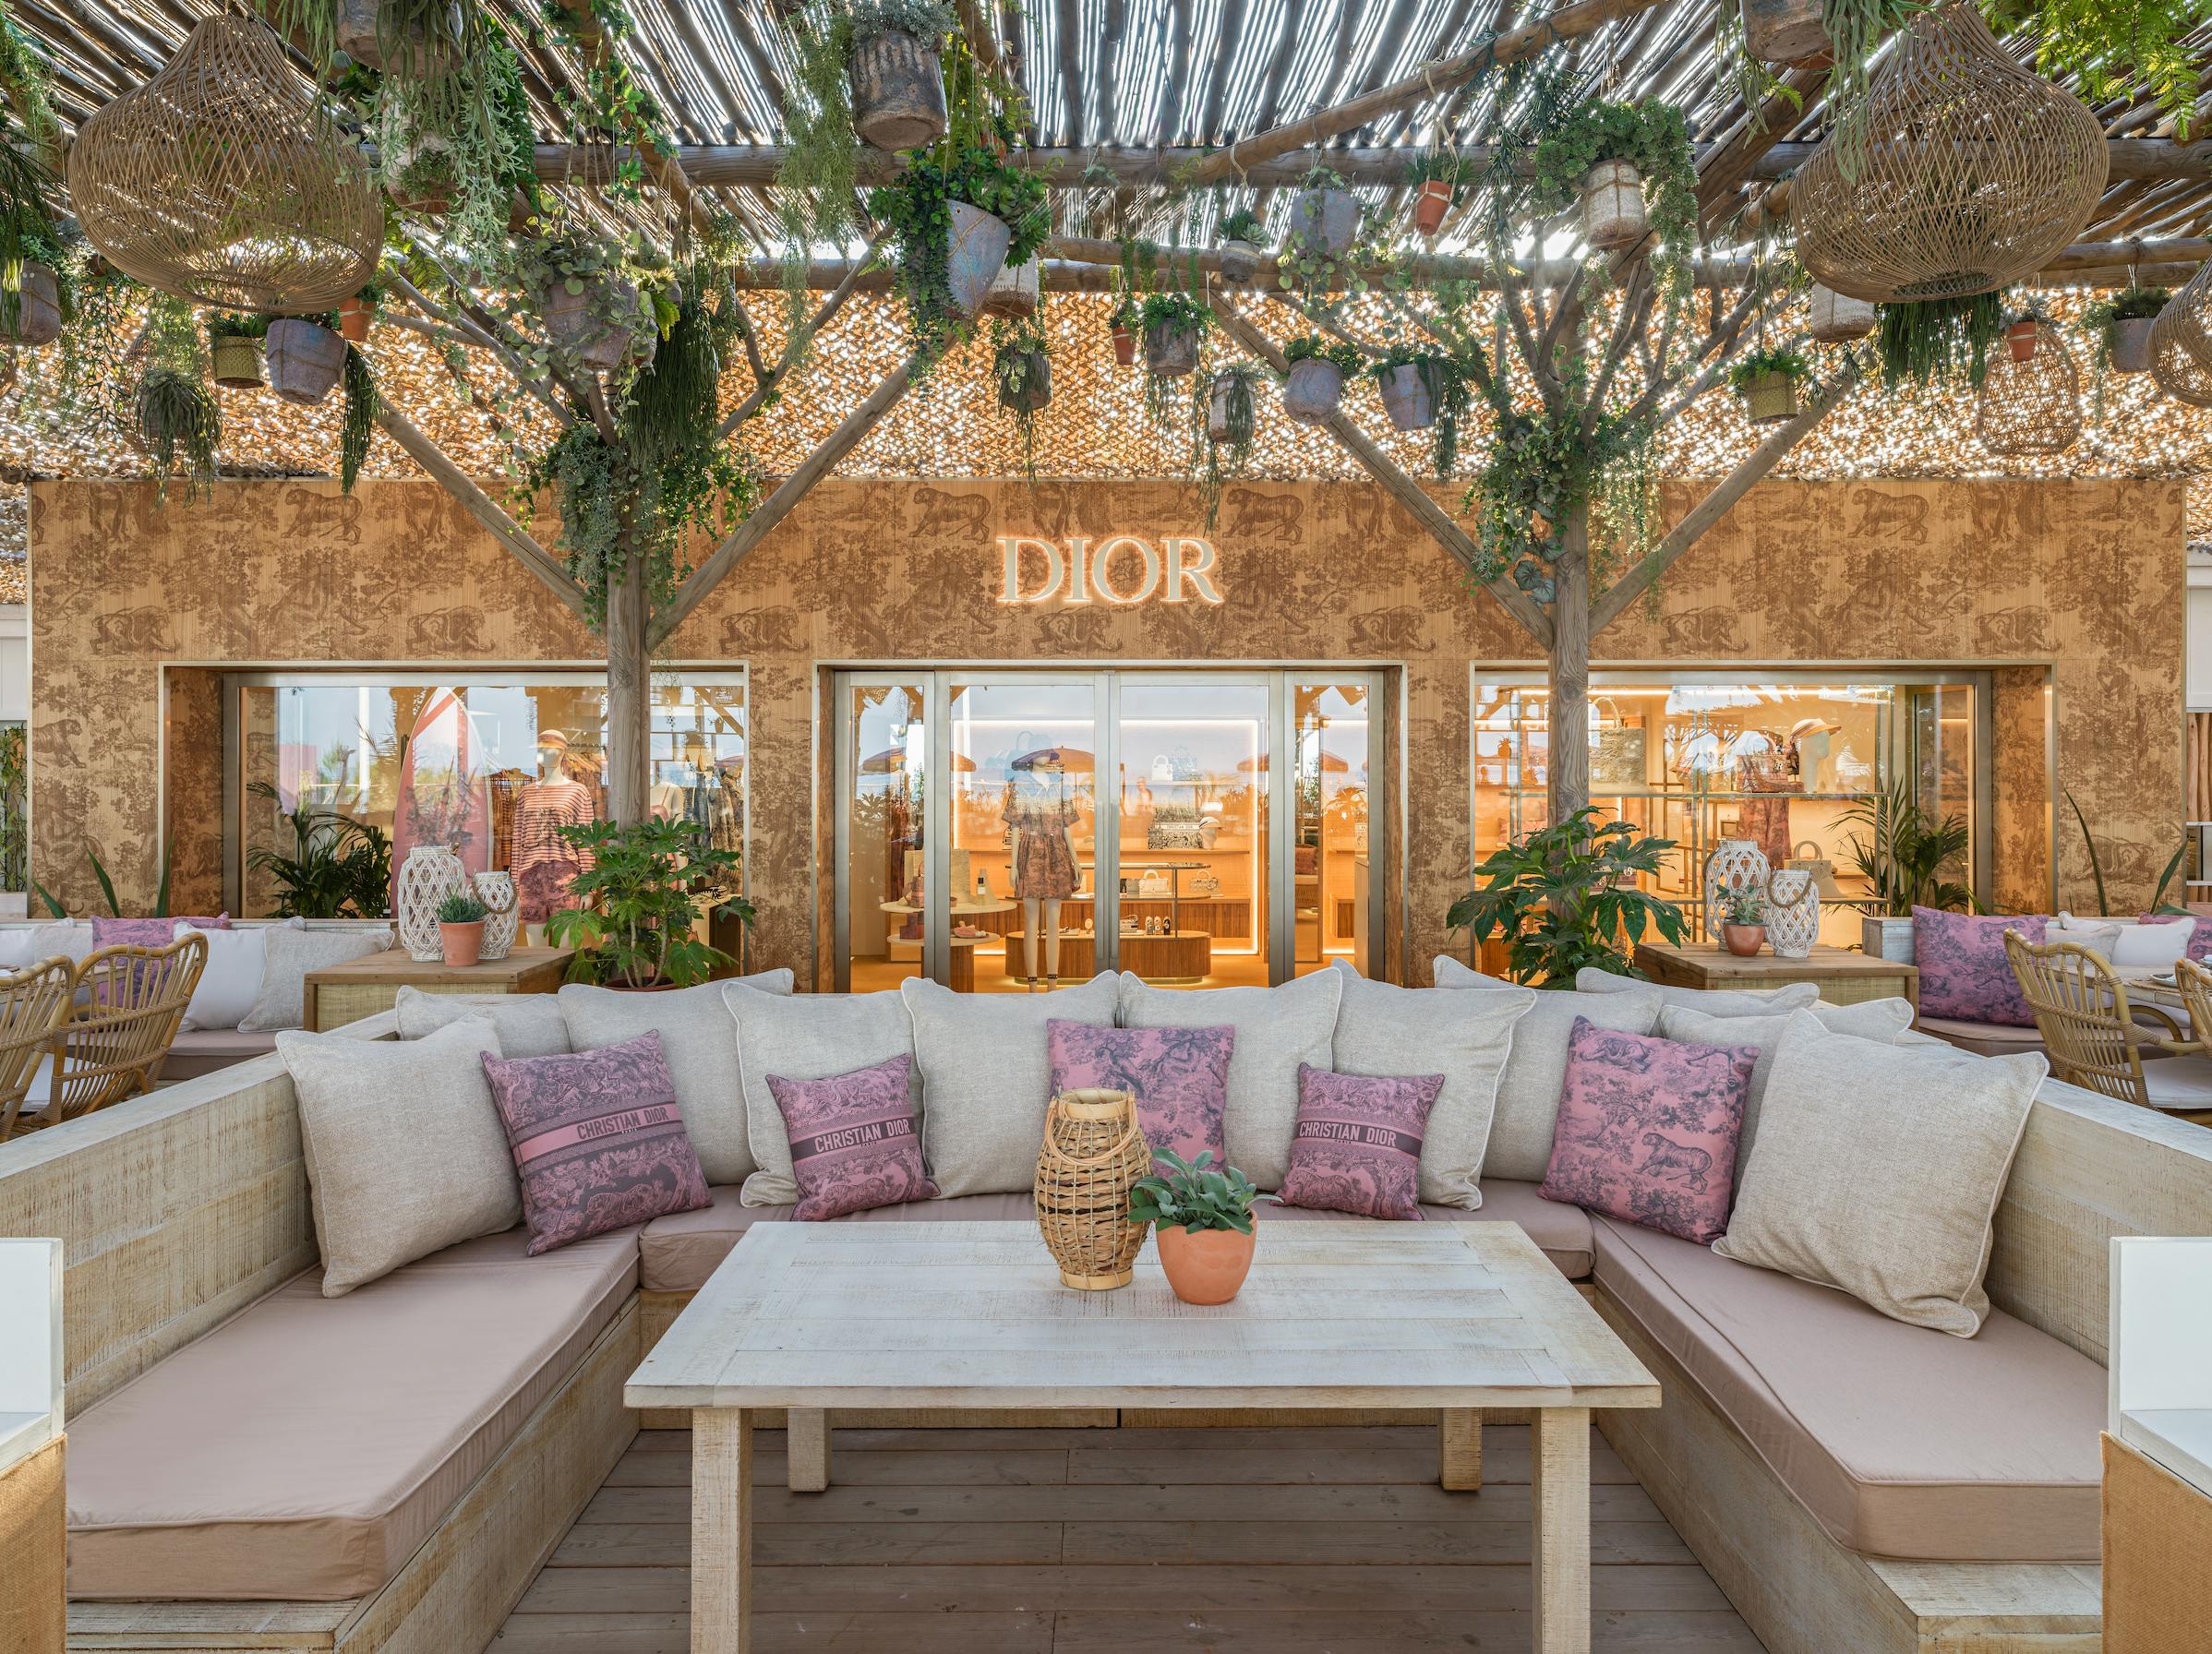 The new Dior cafe in St Tropez - Chic at any age